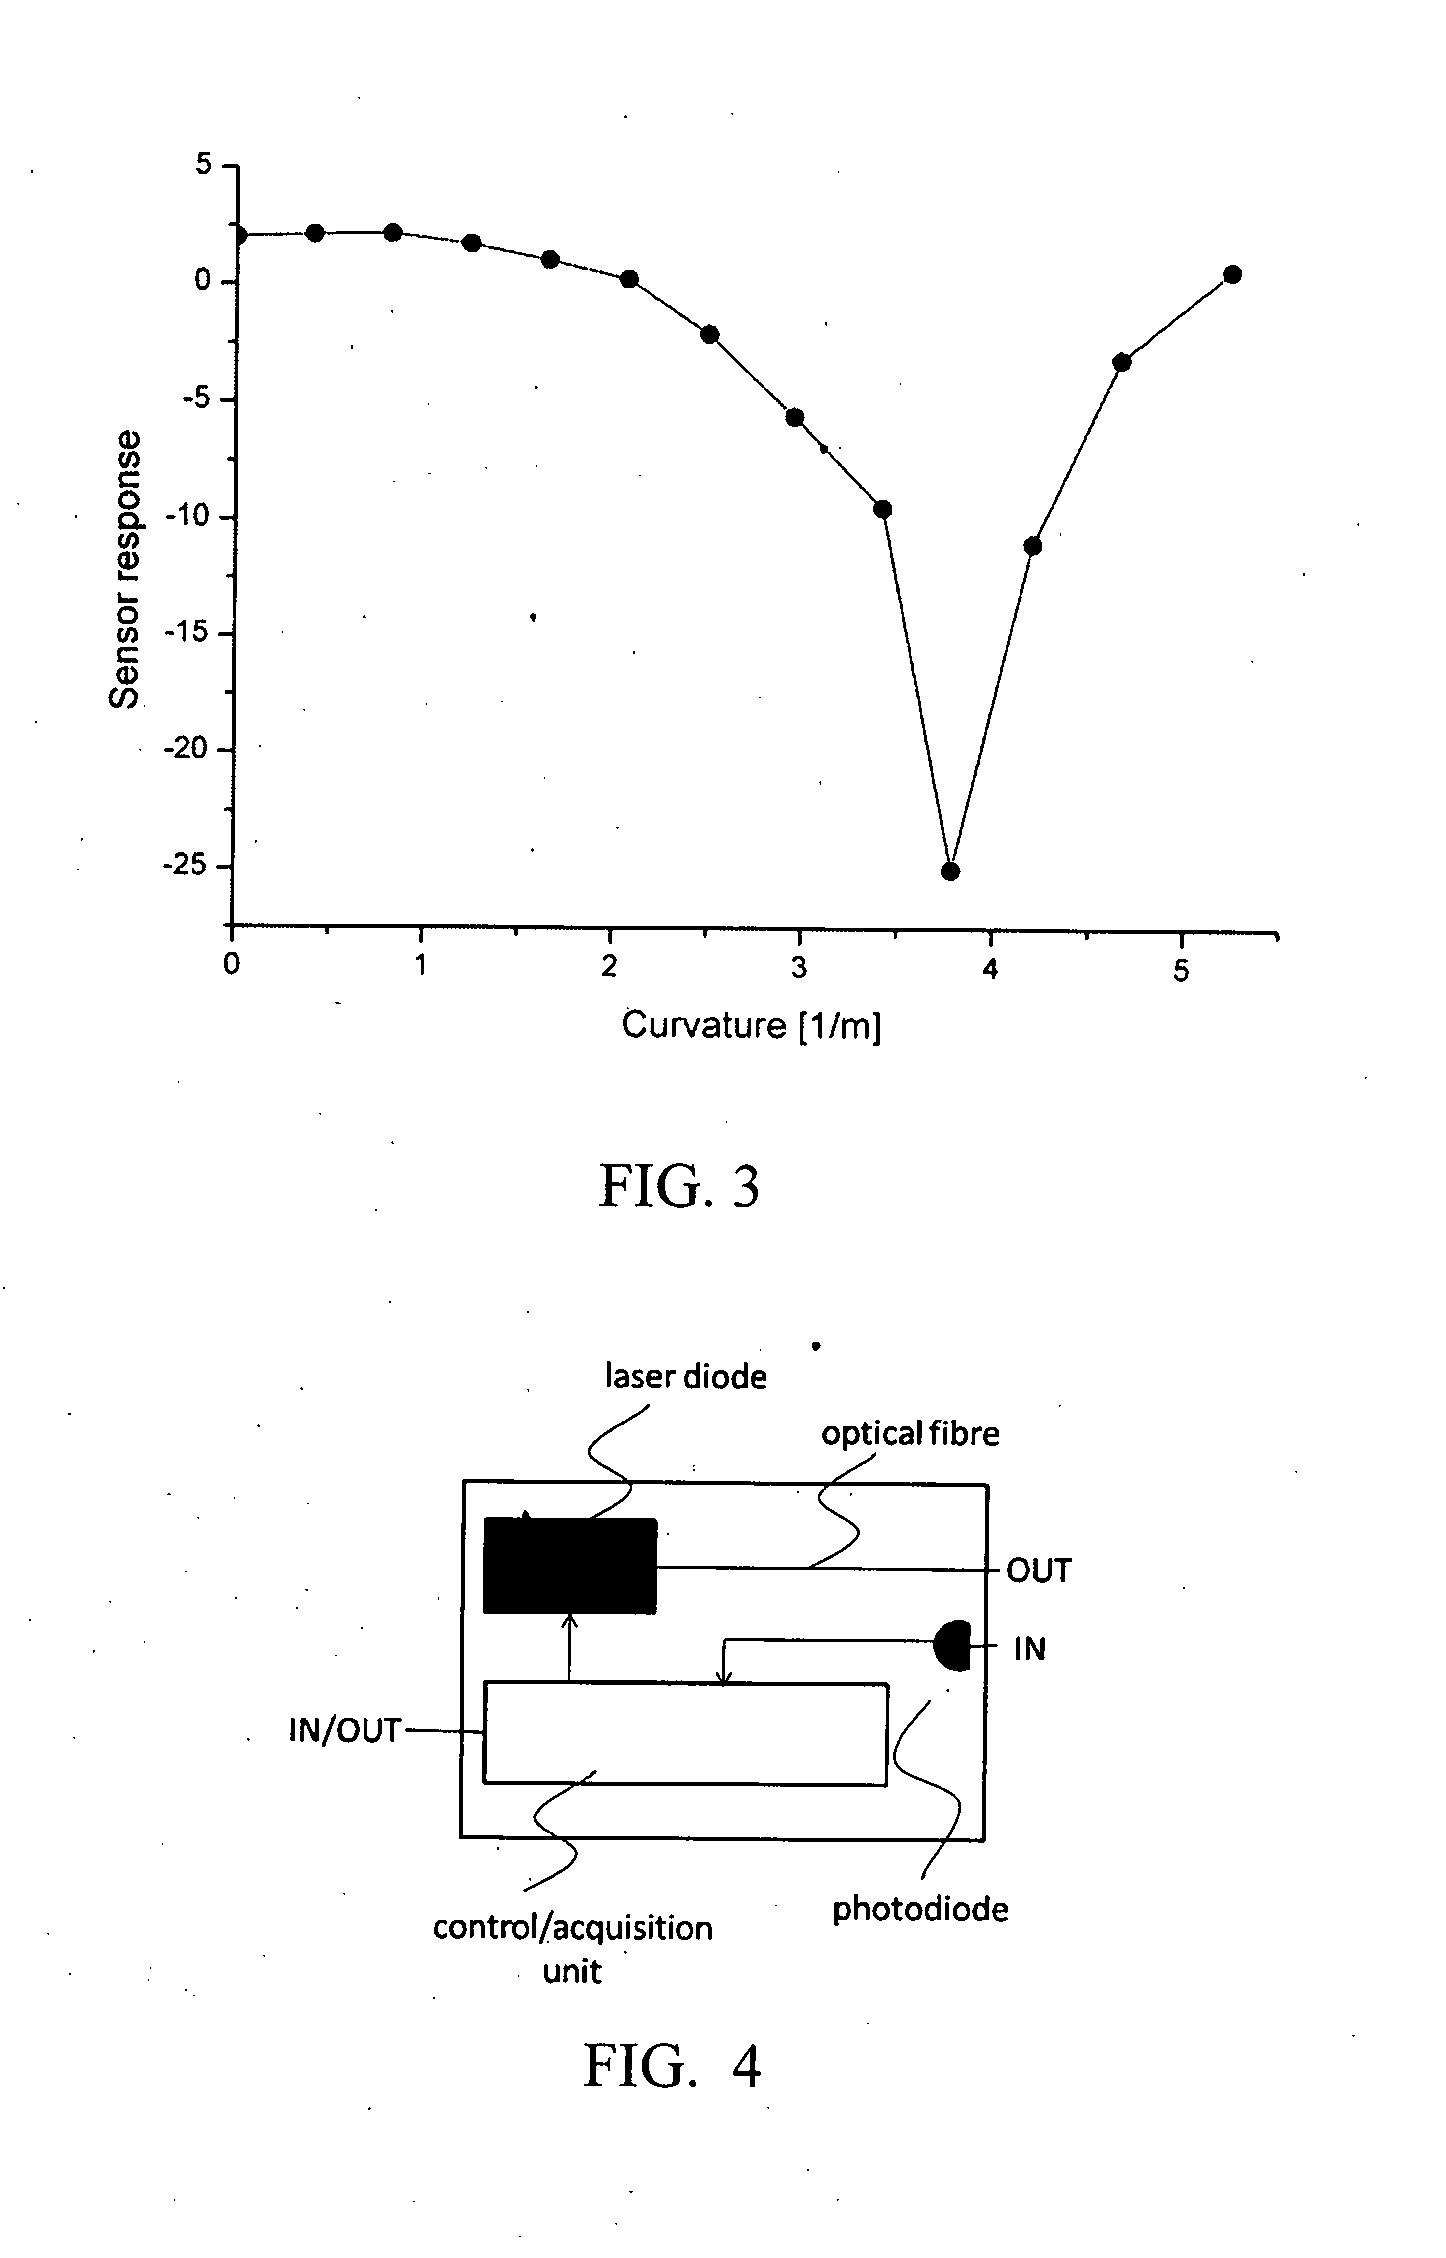 Apparatus and Method for Monitoring Respiration Volumes and Synchronization of Triggering in Mechanical Ventilation by Measuring the Local Curvature of the Torso Surface